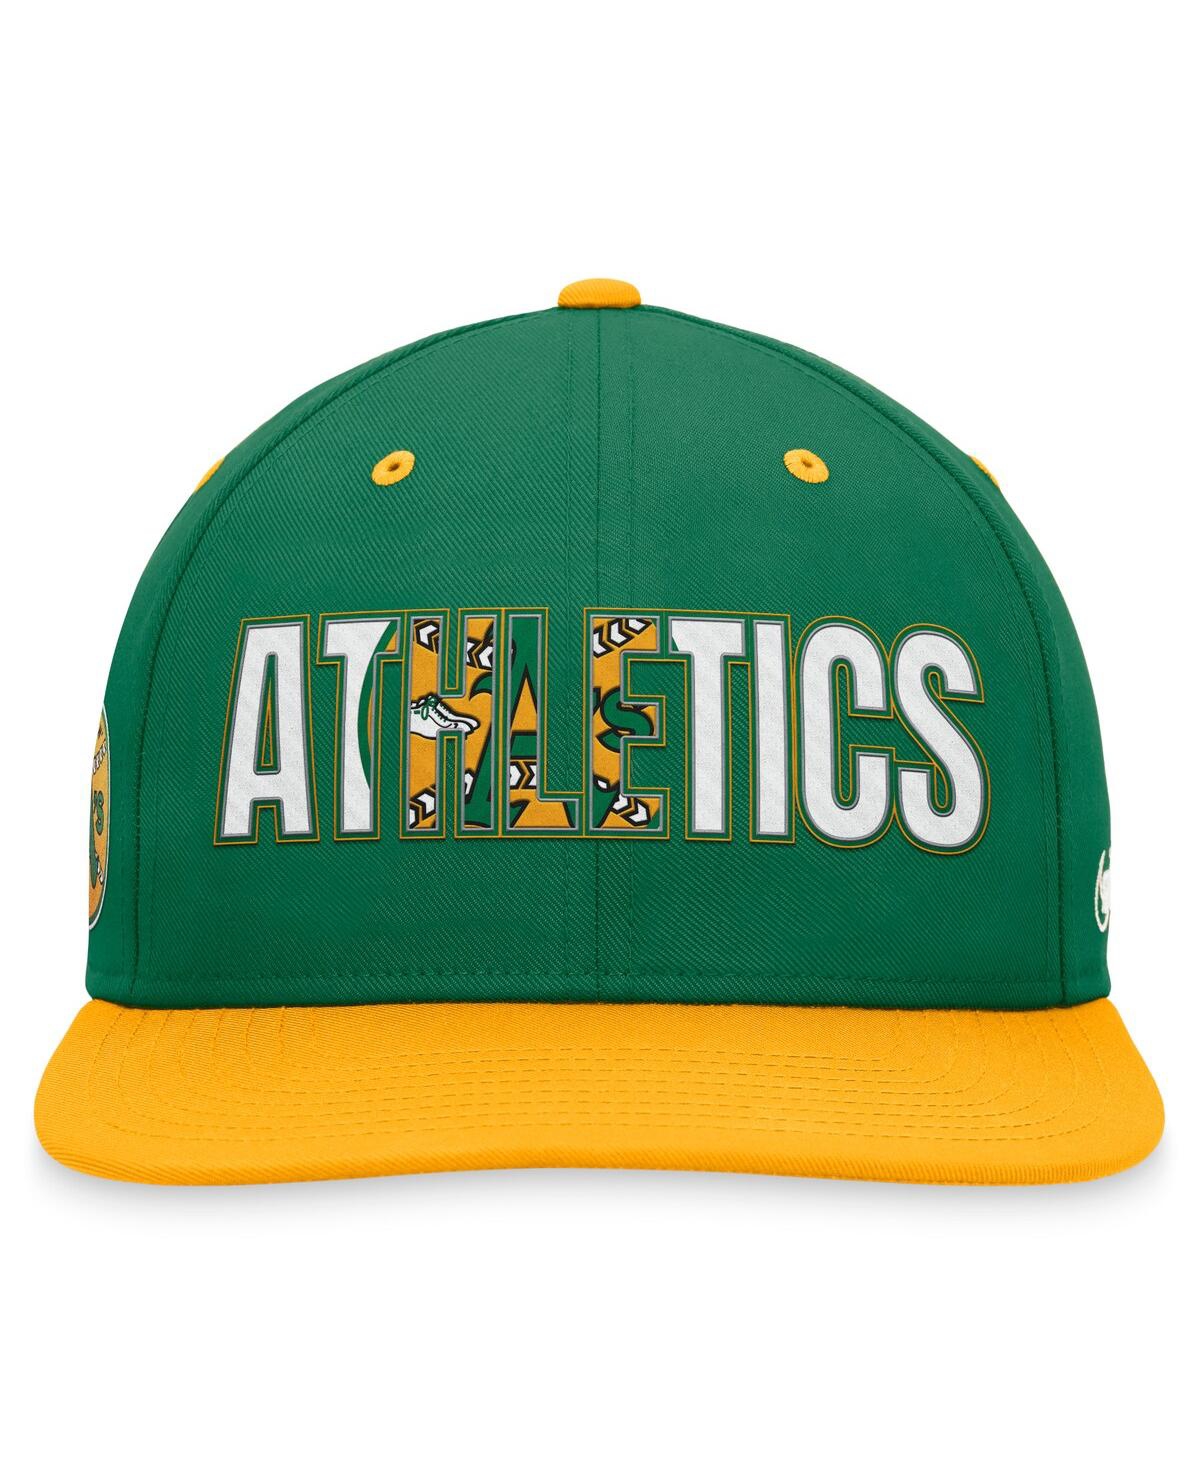 Shop Nike Men's  Green Oakland Athletics Cooperstown Collection Pro Snapback Hat